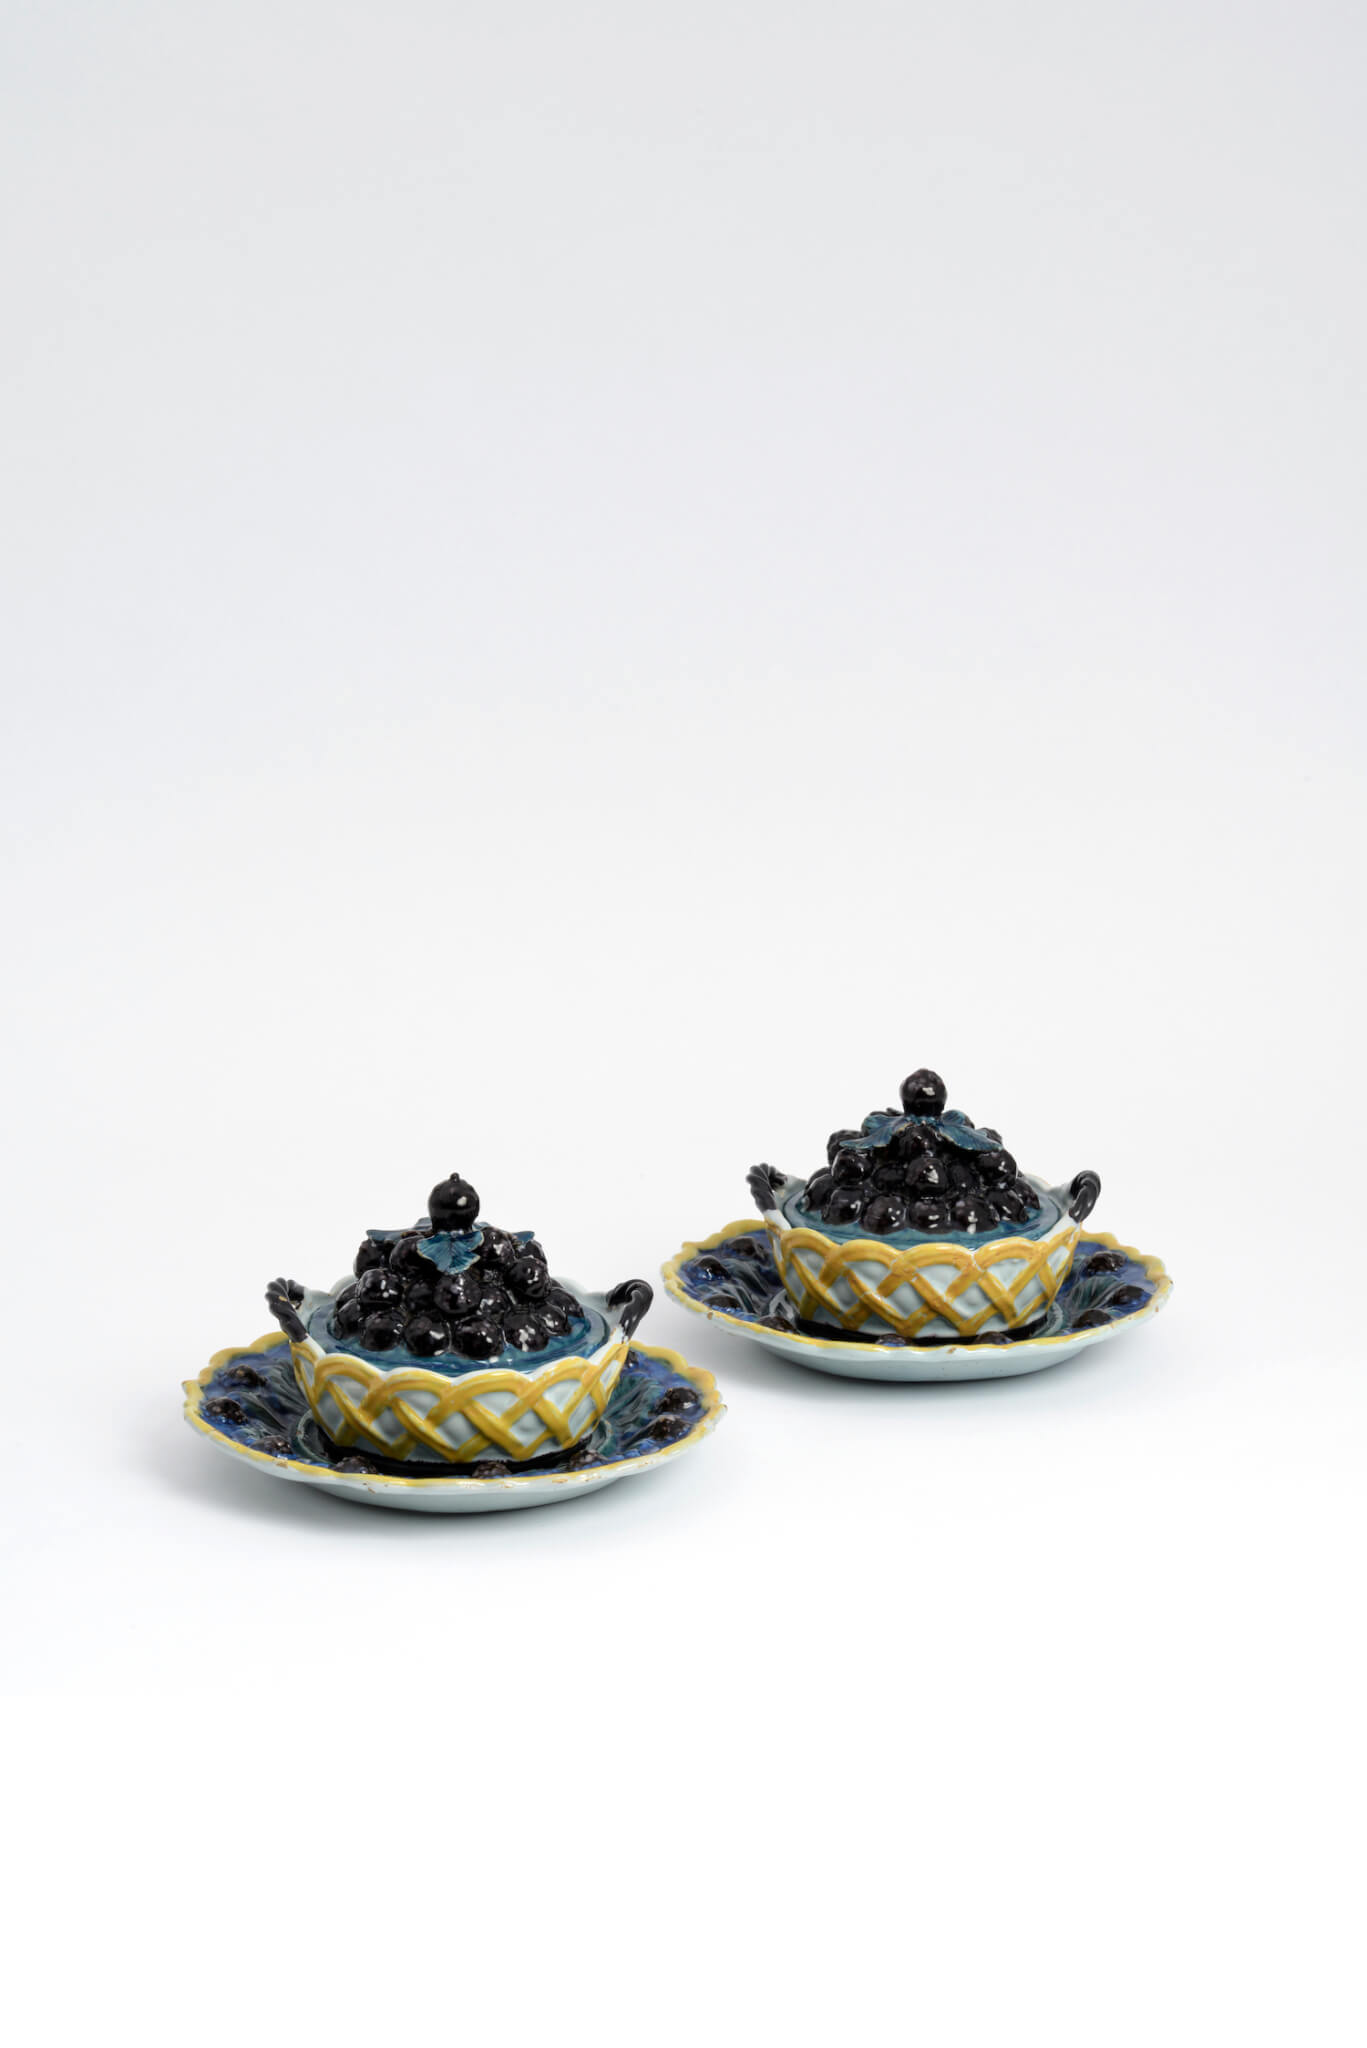 • D1870. Pair of Polychrome Blackberry Tureens, Covers and Stands